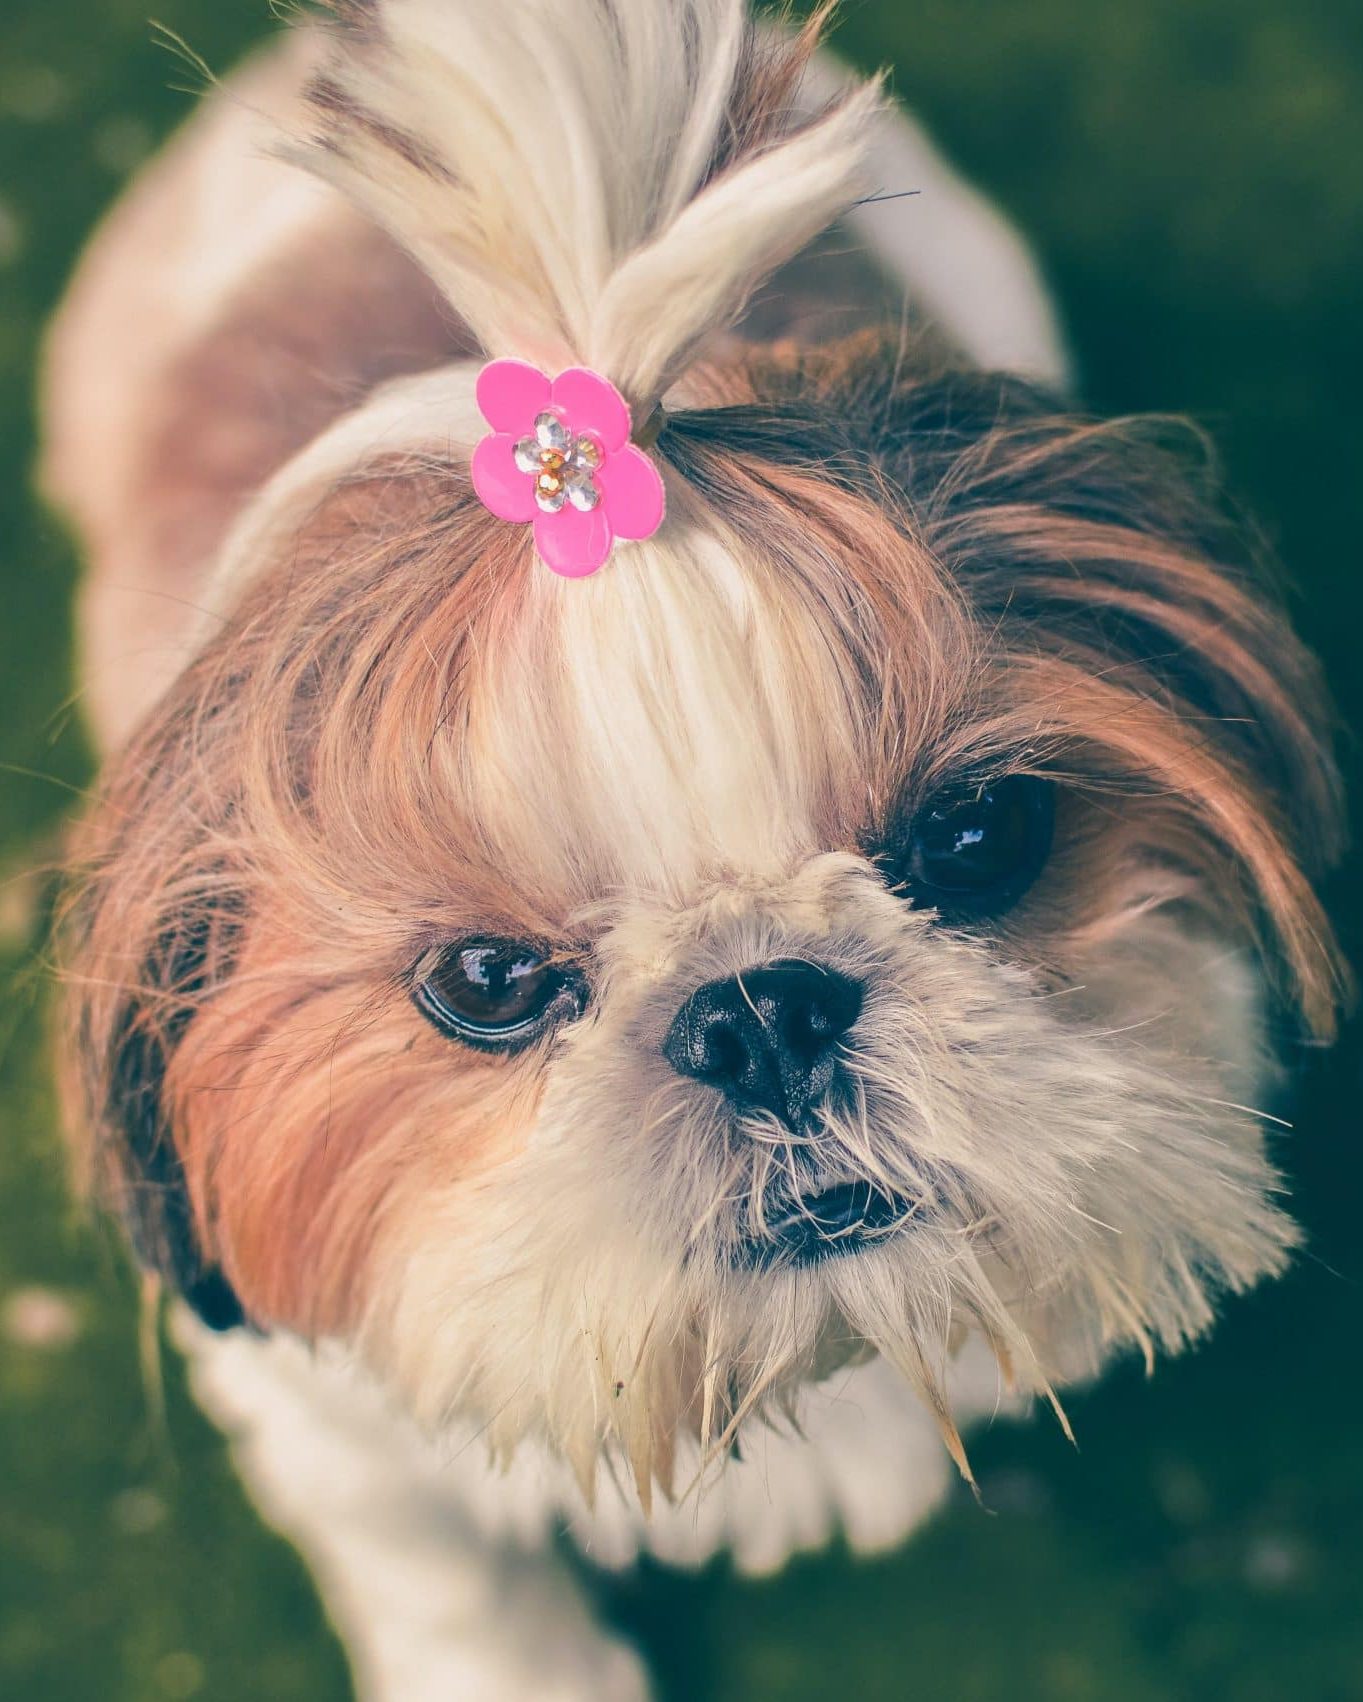 A dog with a pink flower in its hair.